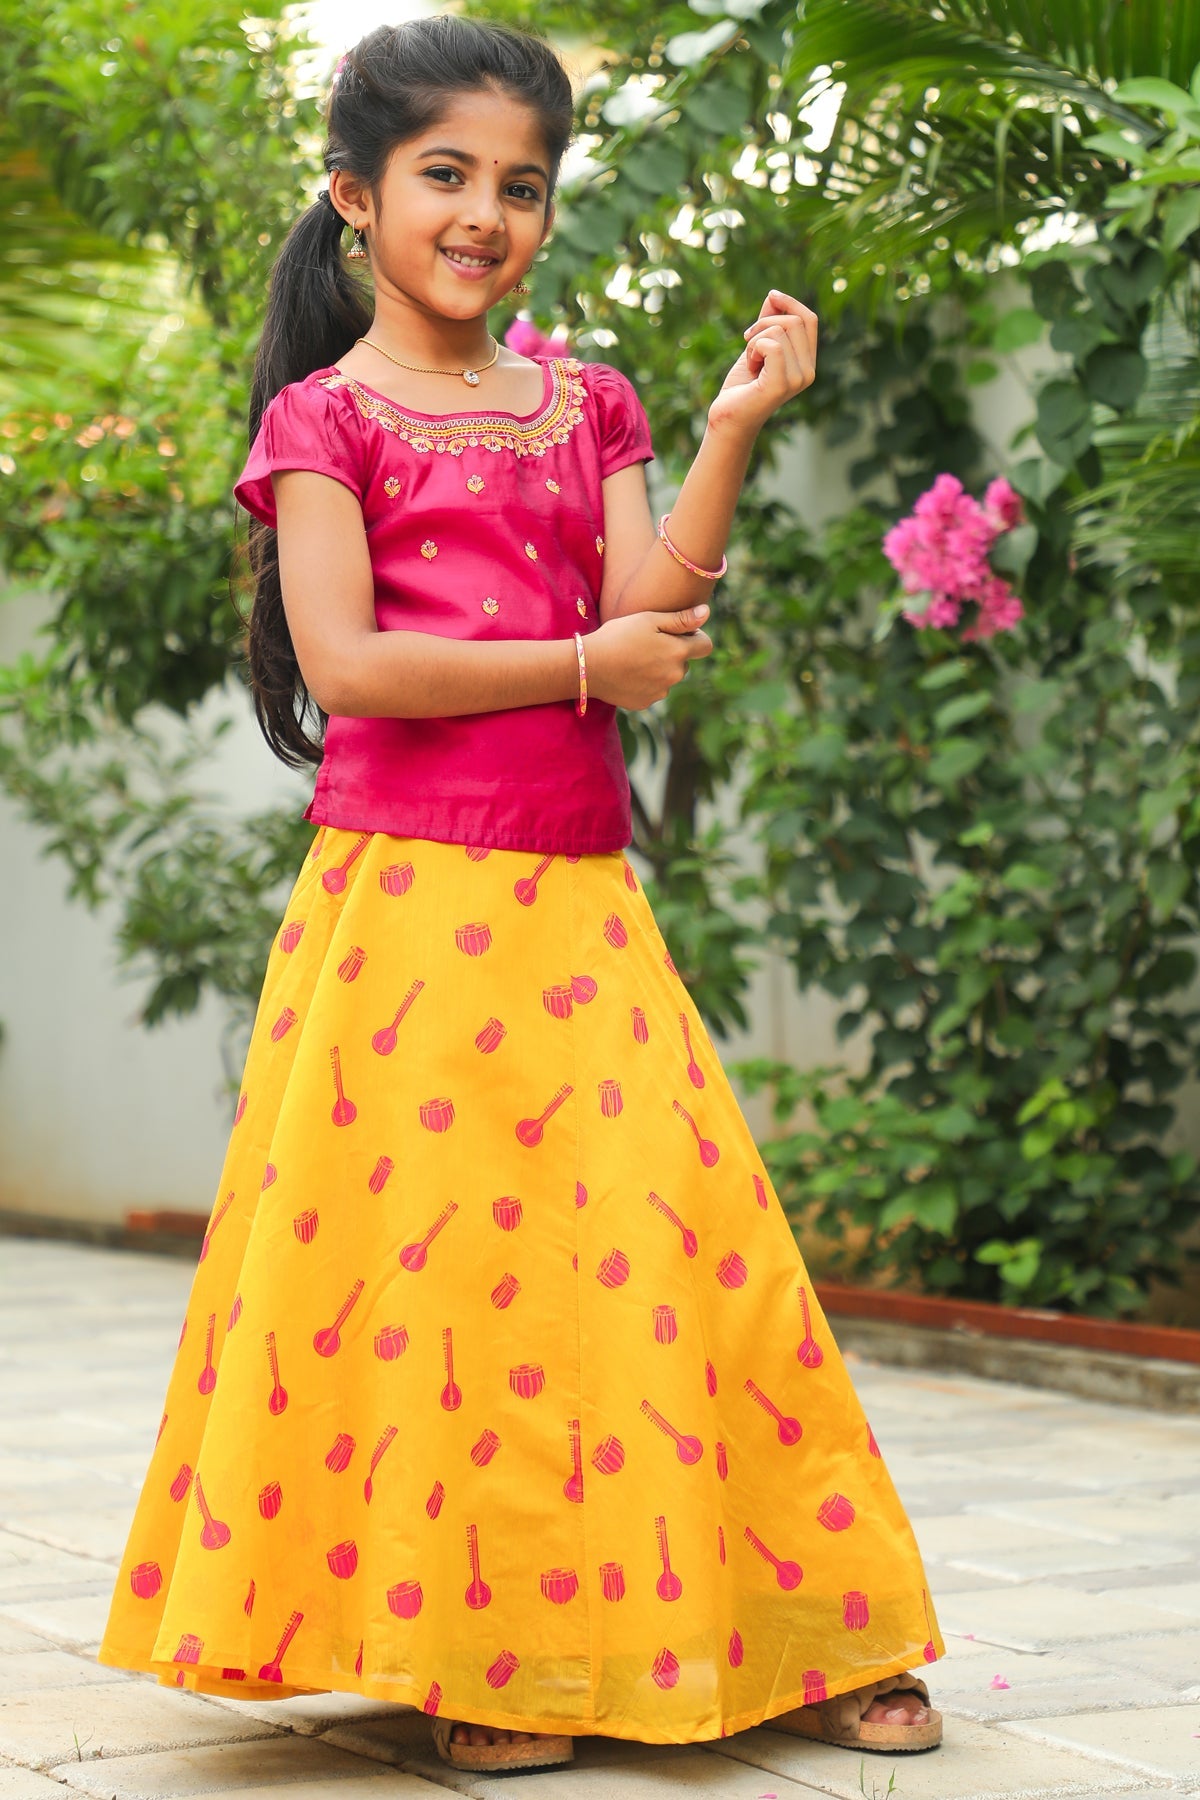 Floral Embroidered Top Raagha Motif Printed Skirt Set Pink Yellow